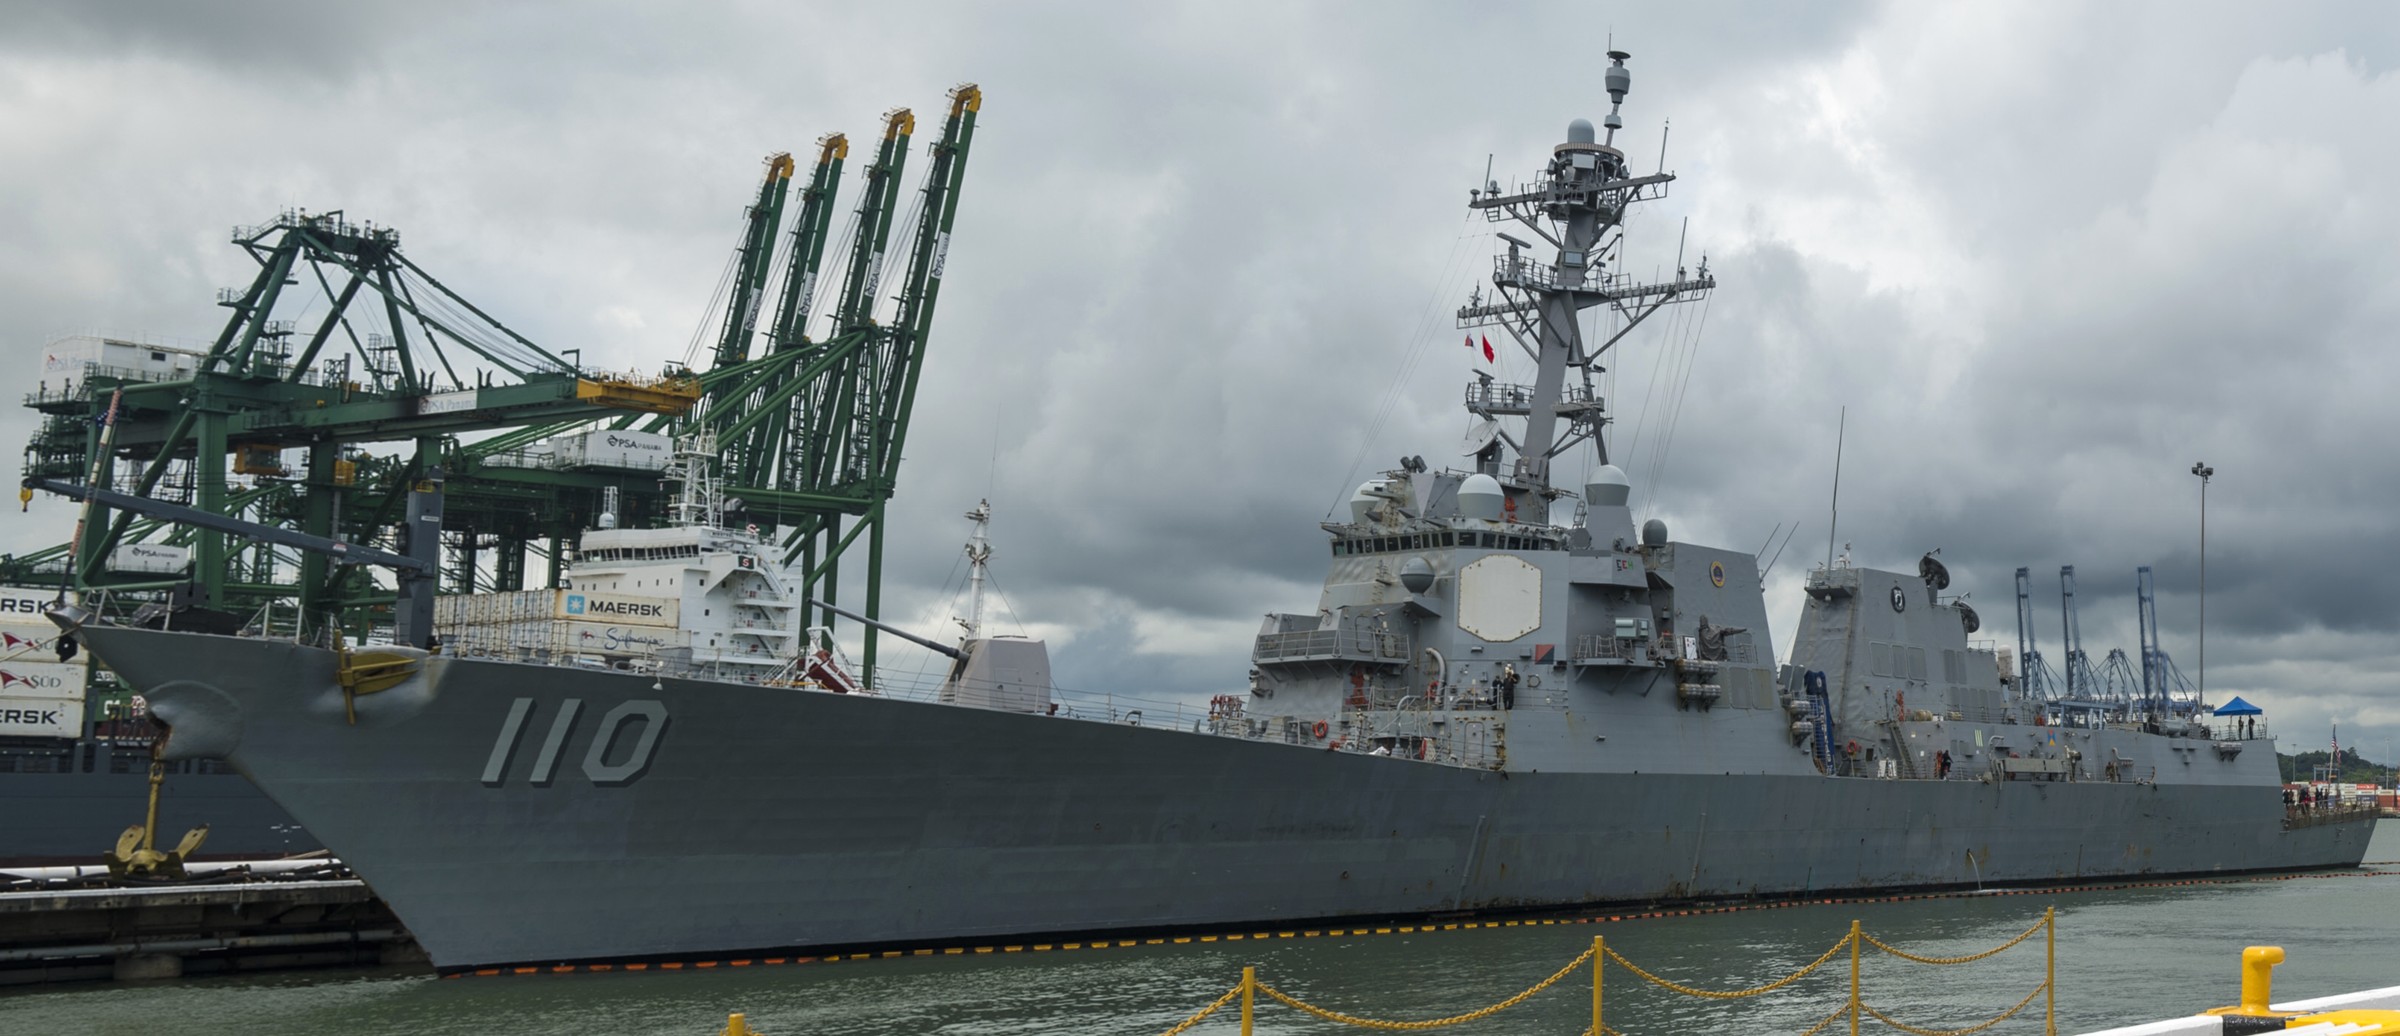 ddg-110 uss william p. lawrence arleigh burke class guided missile destroyer aegis us navy balboa panama 62